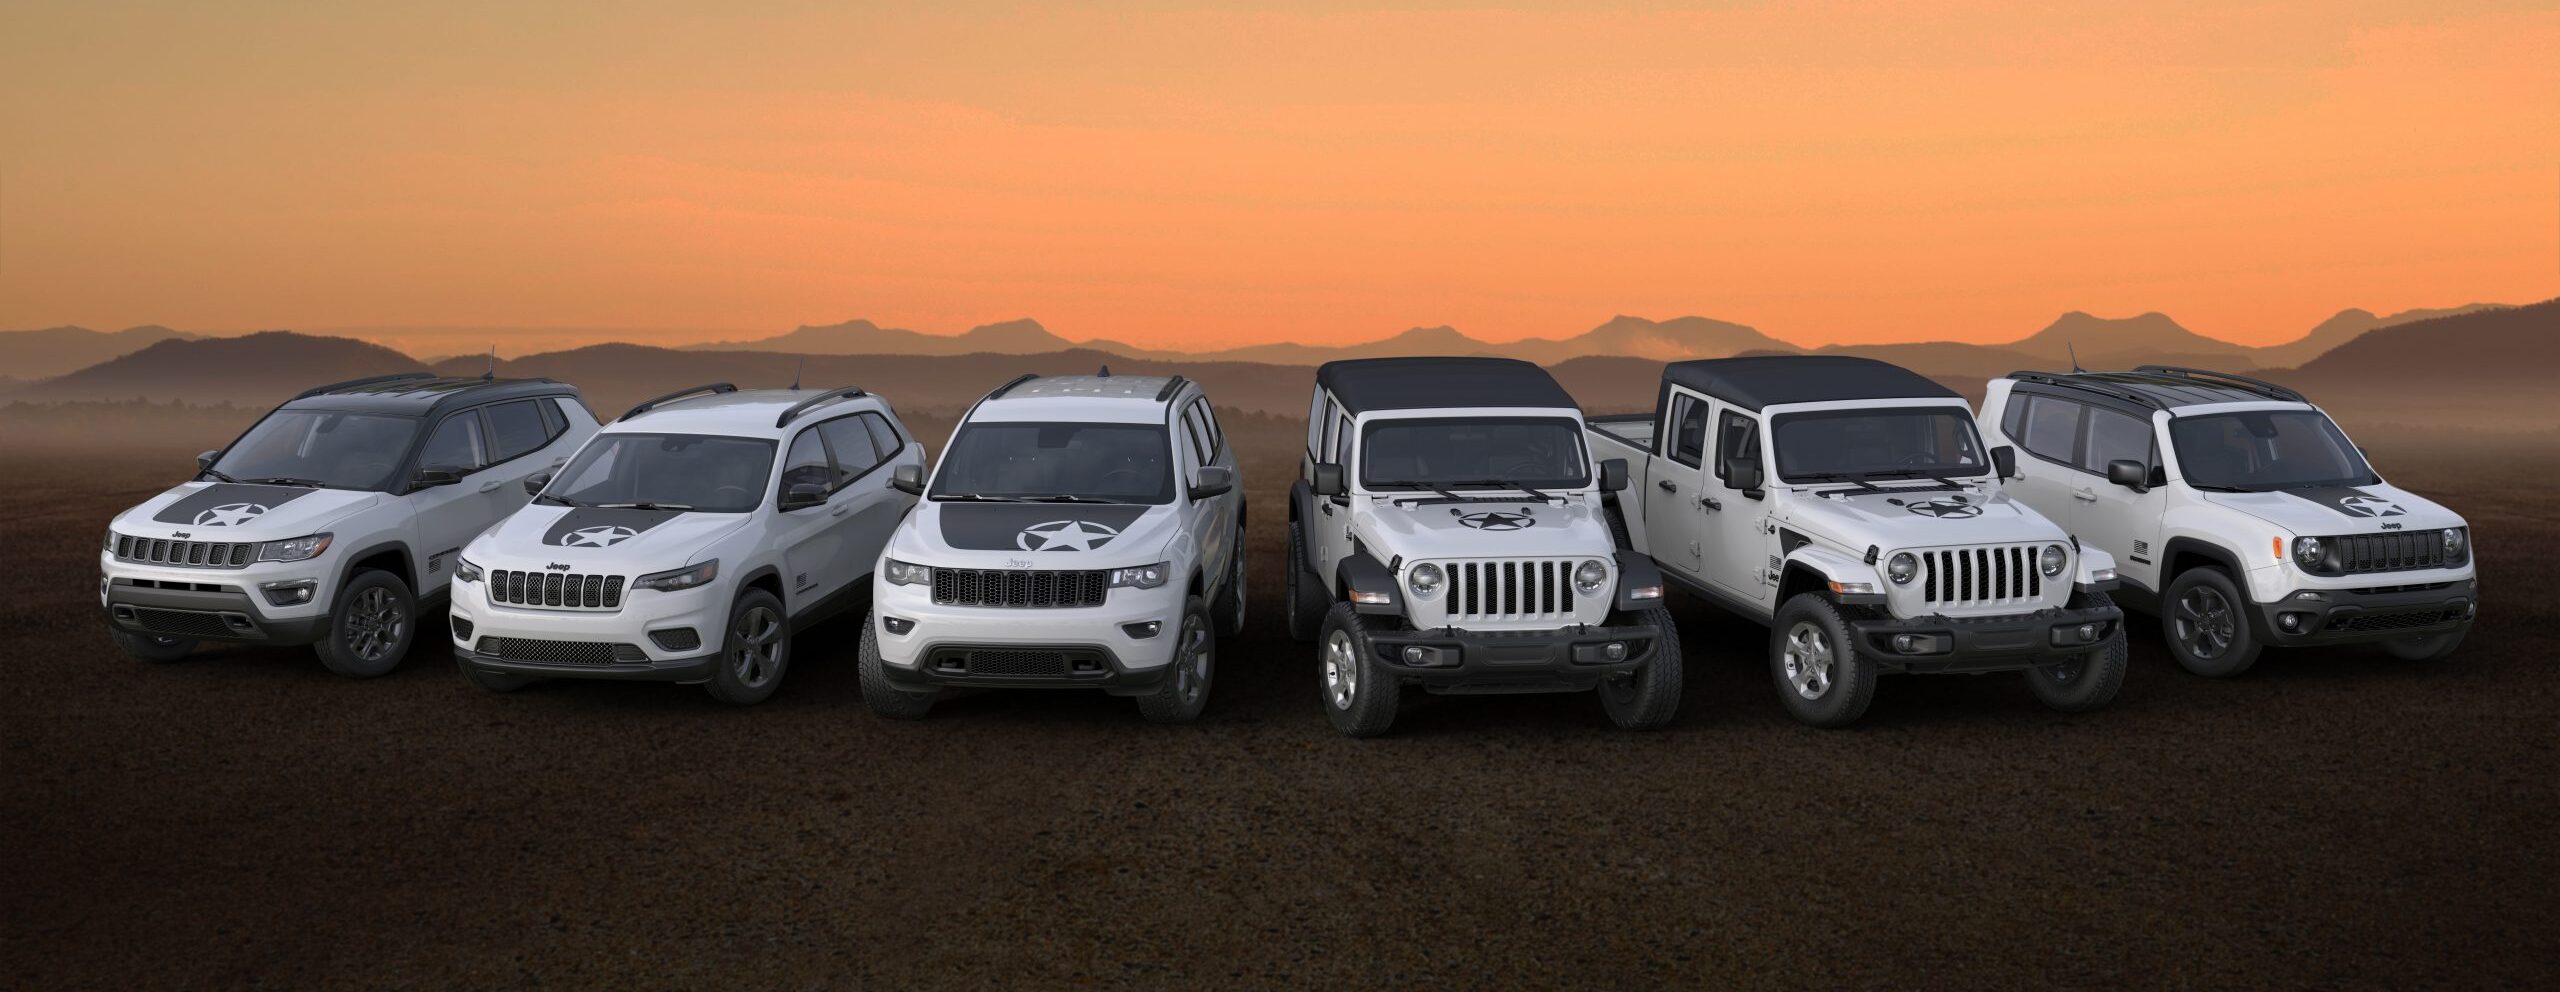 Jeep Expands Freedom Edition to All Models | THE SHOP